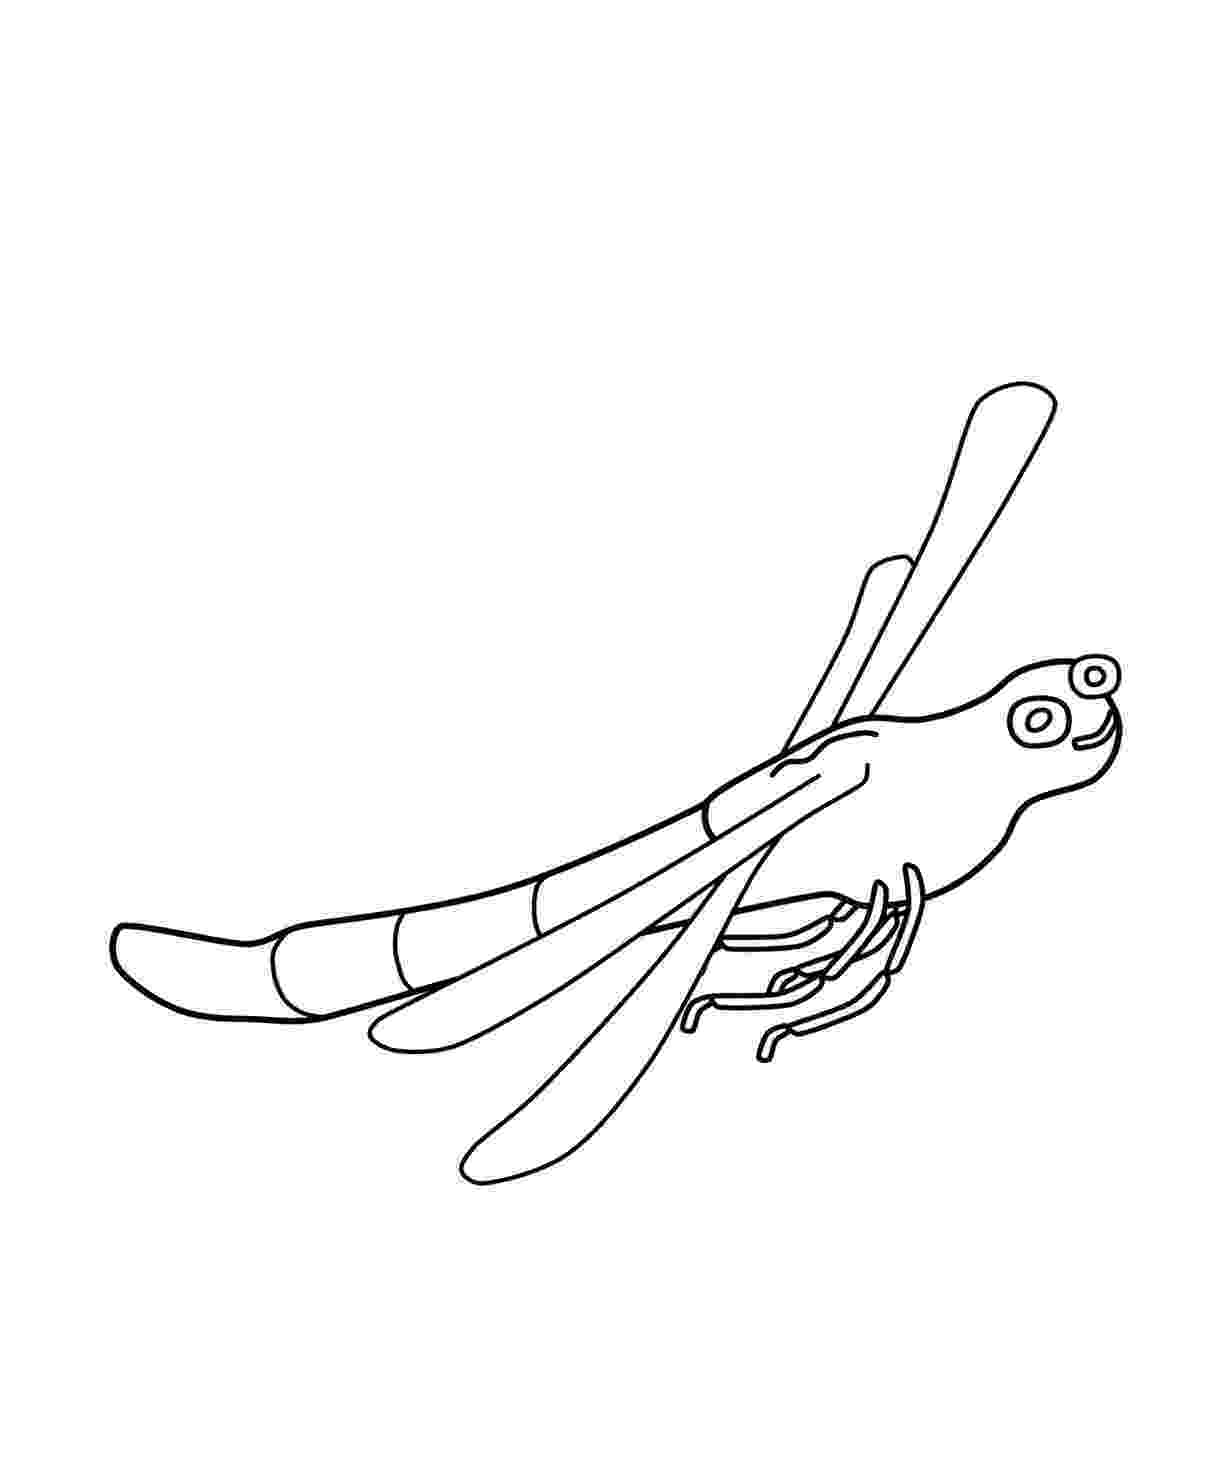 dragonfly coloring free printable dragonfly coloring pages for kids animal dragonfly coloring 1 2